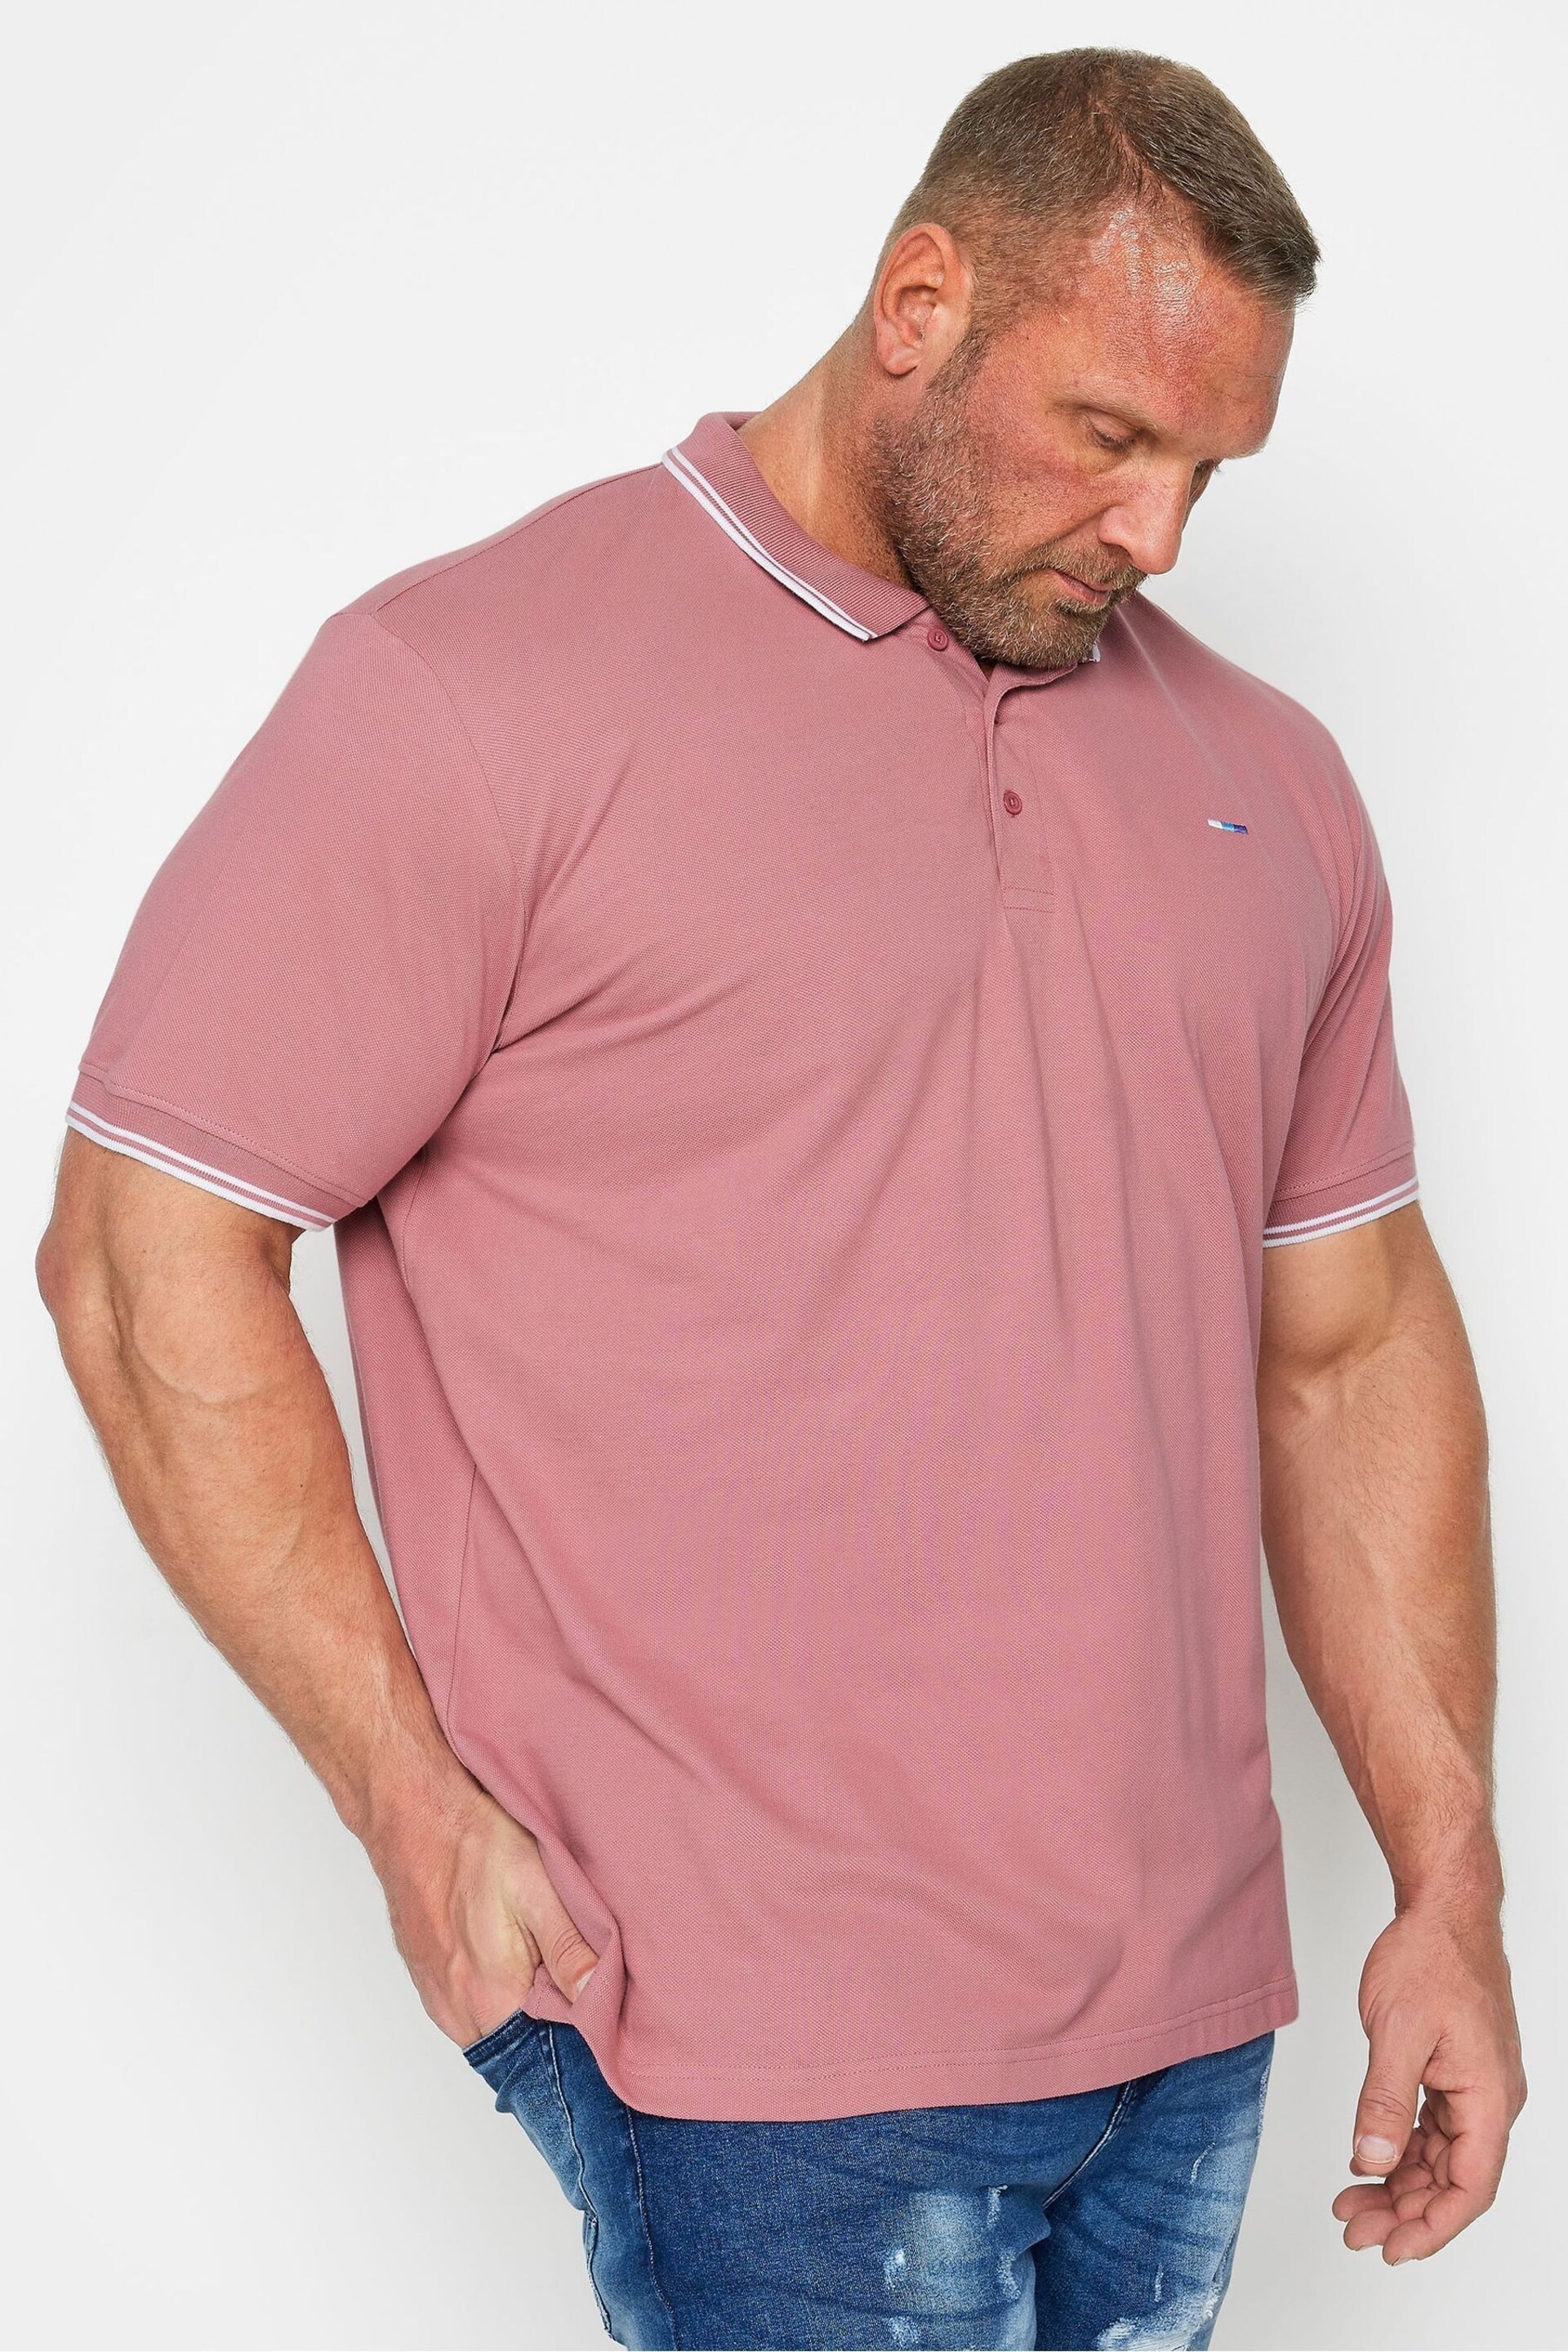 BadRhino Big & Tall Mineral Blue/Rose Pink/Violet Purple 3 Pack Tipped Polo Shirts - Image 3 of 6